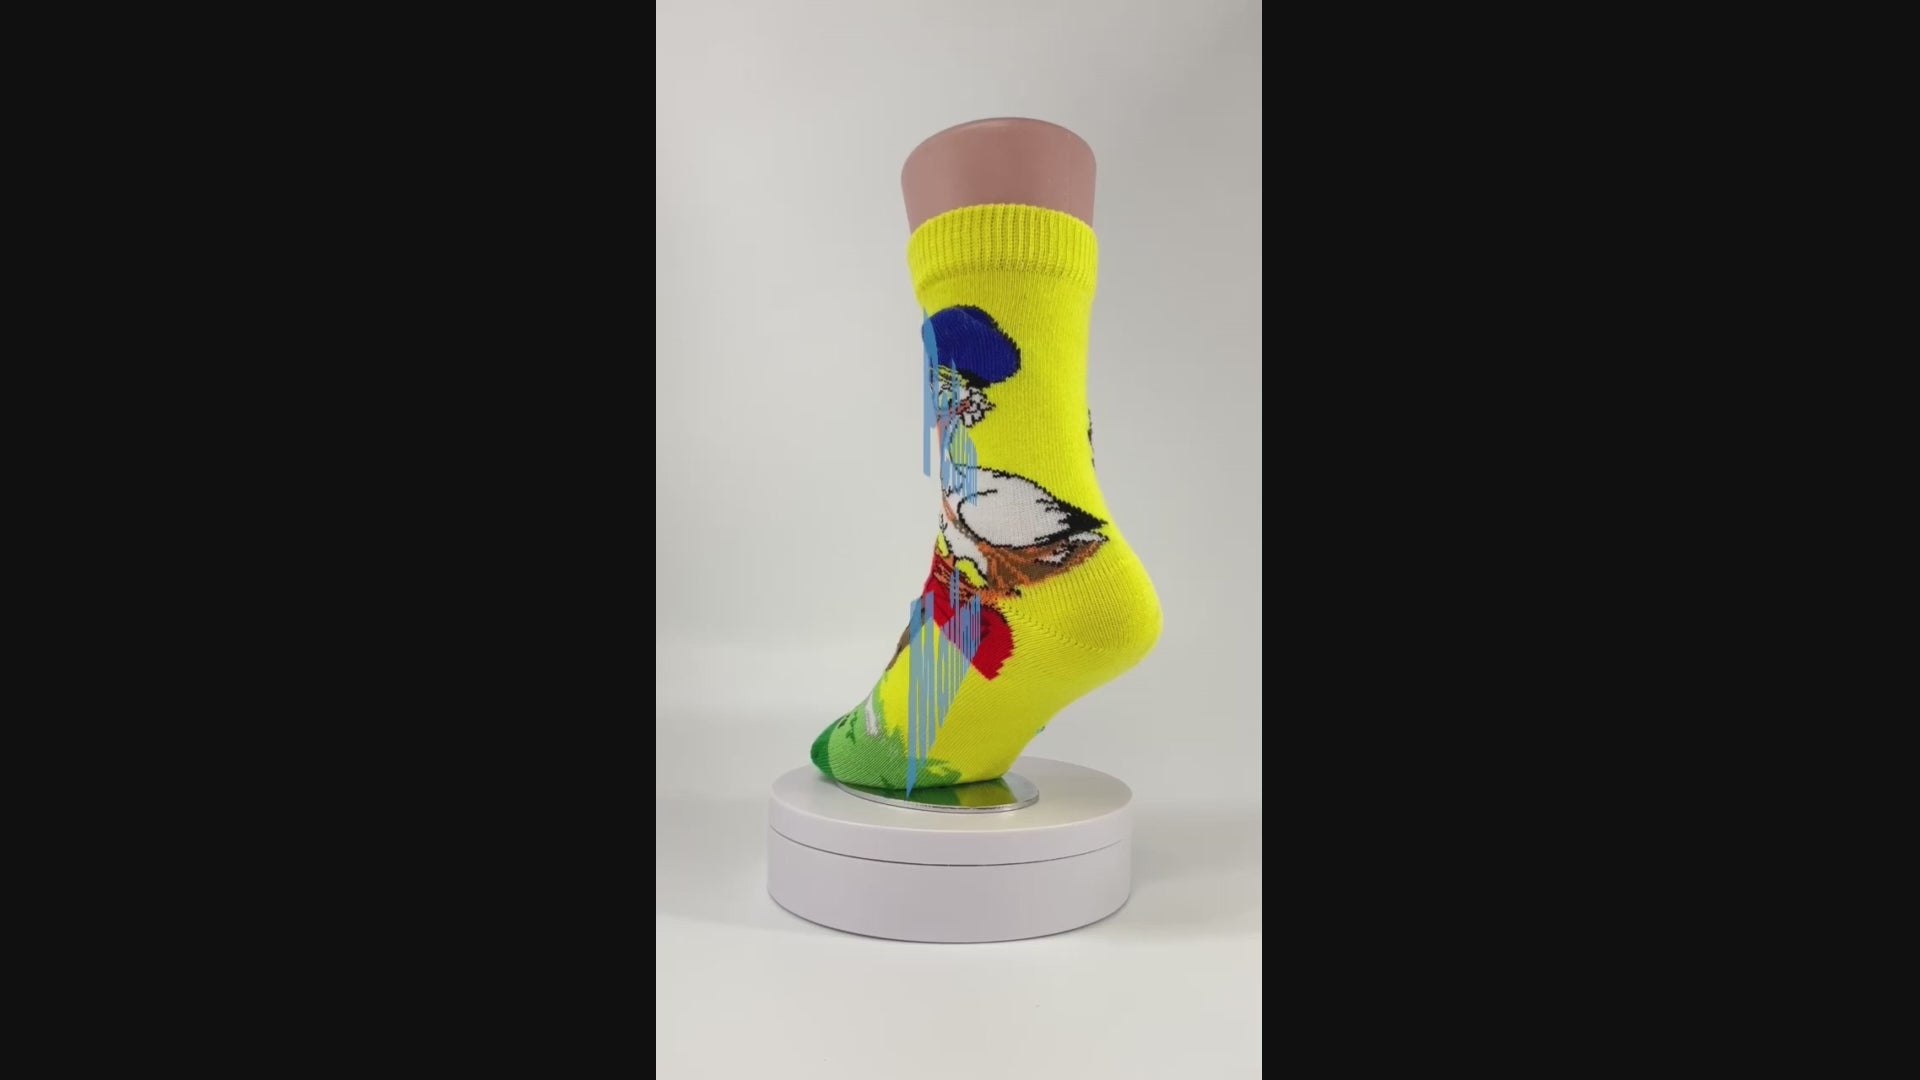 Pelican Mail Carrier Socks (Ages 3-7) from the Sock Panda